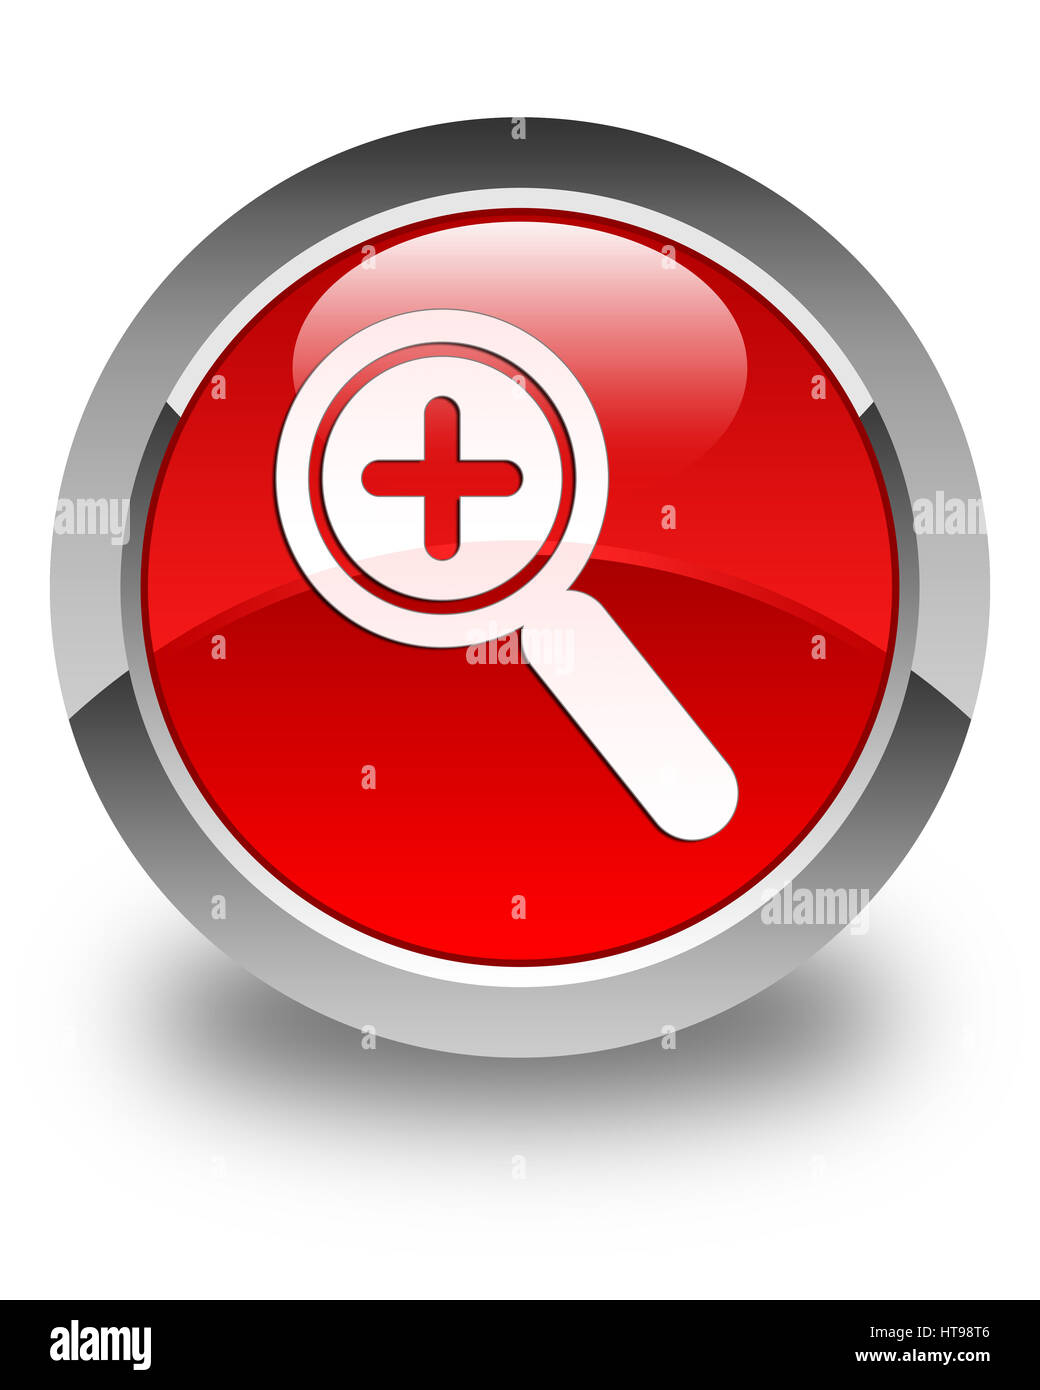 Zoom in icon isolated on glossy red round button abstract illustration Stock Photo